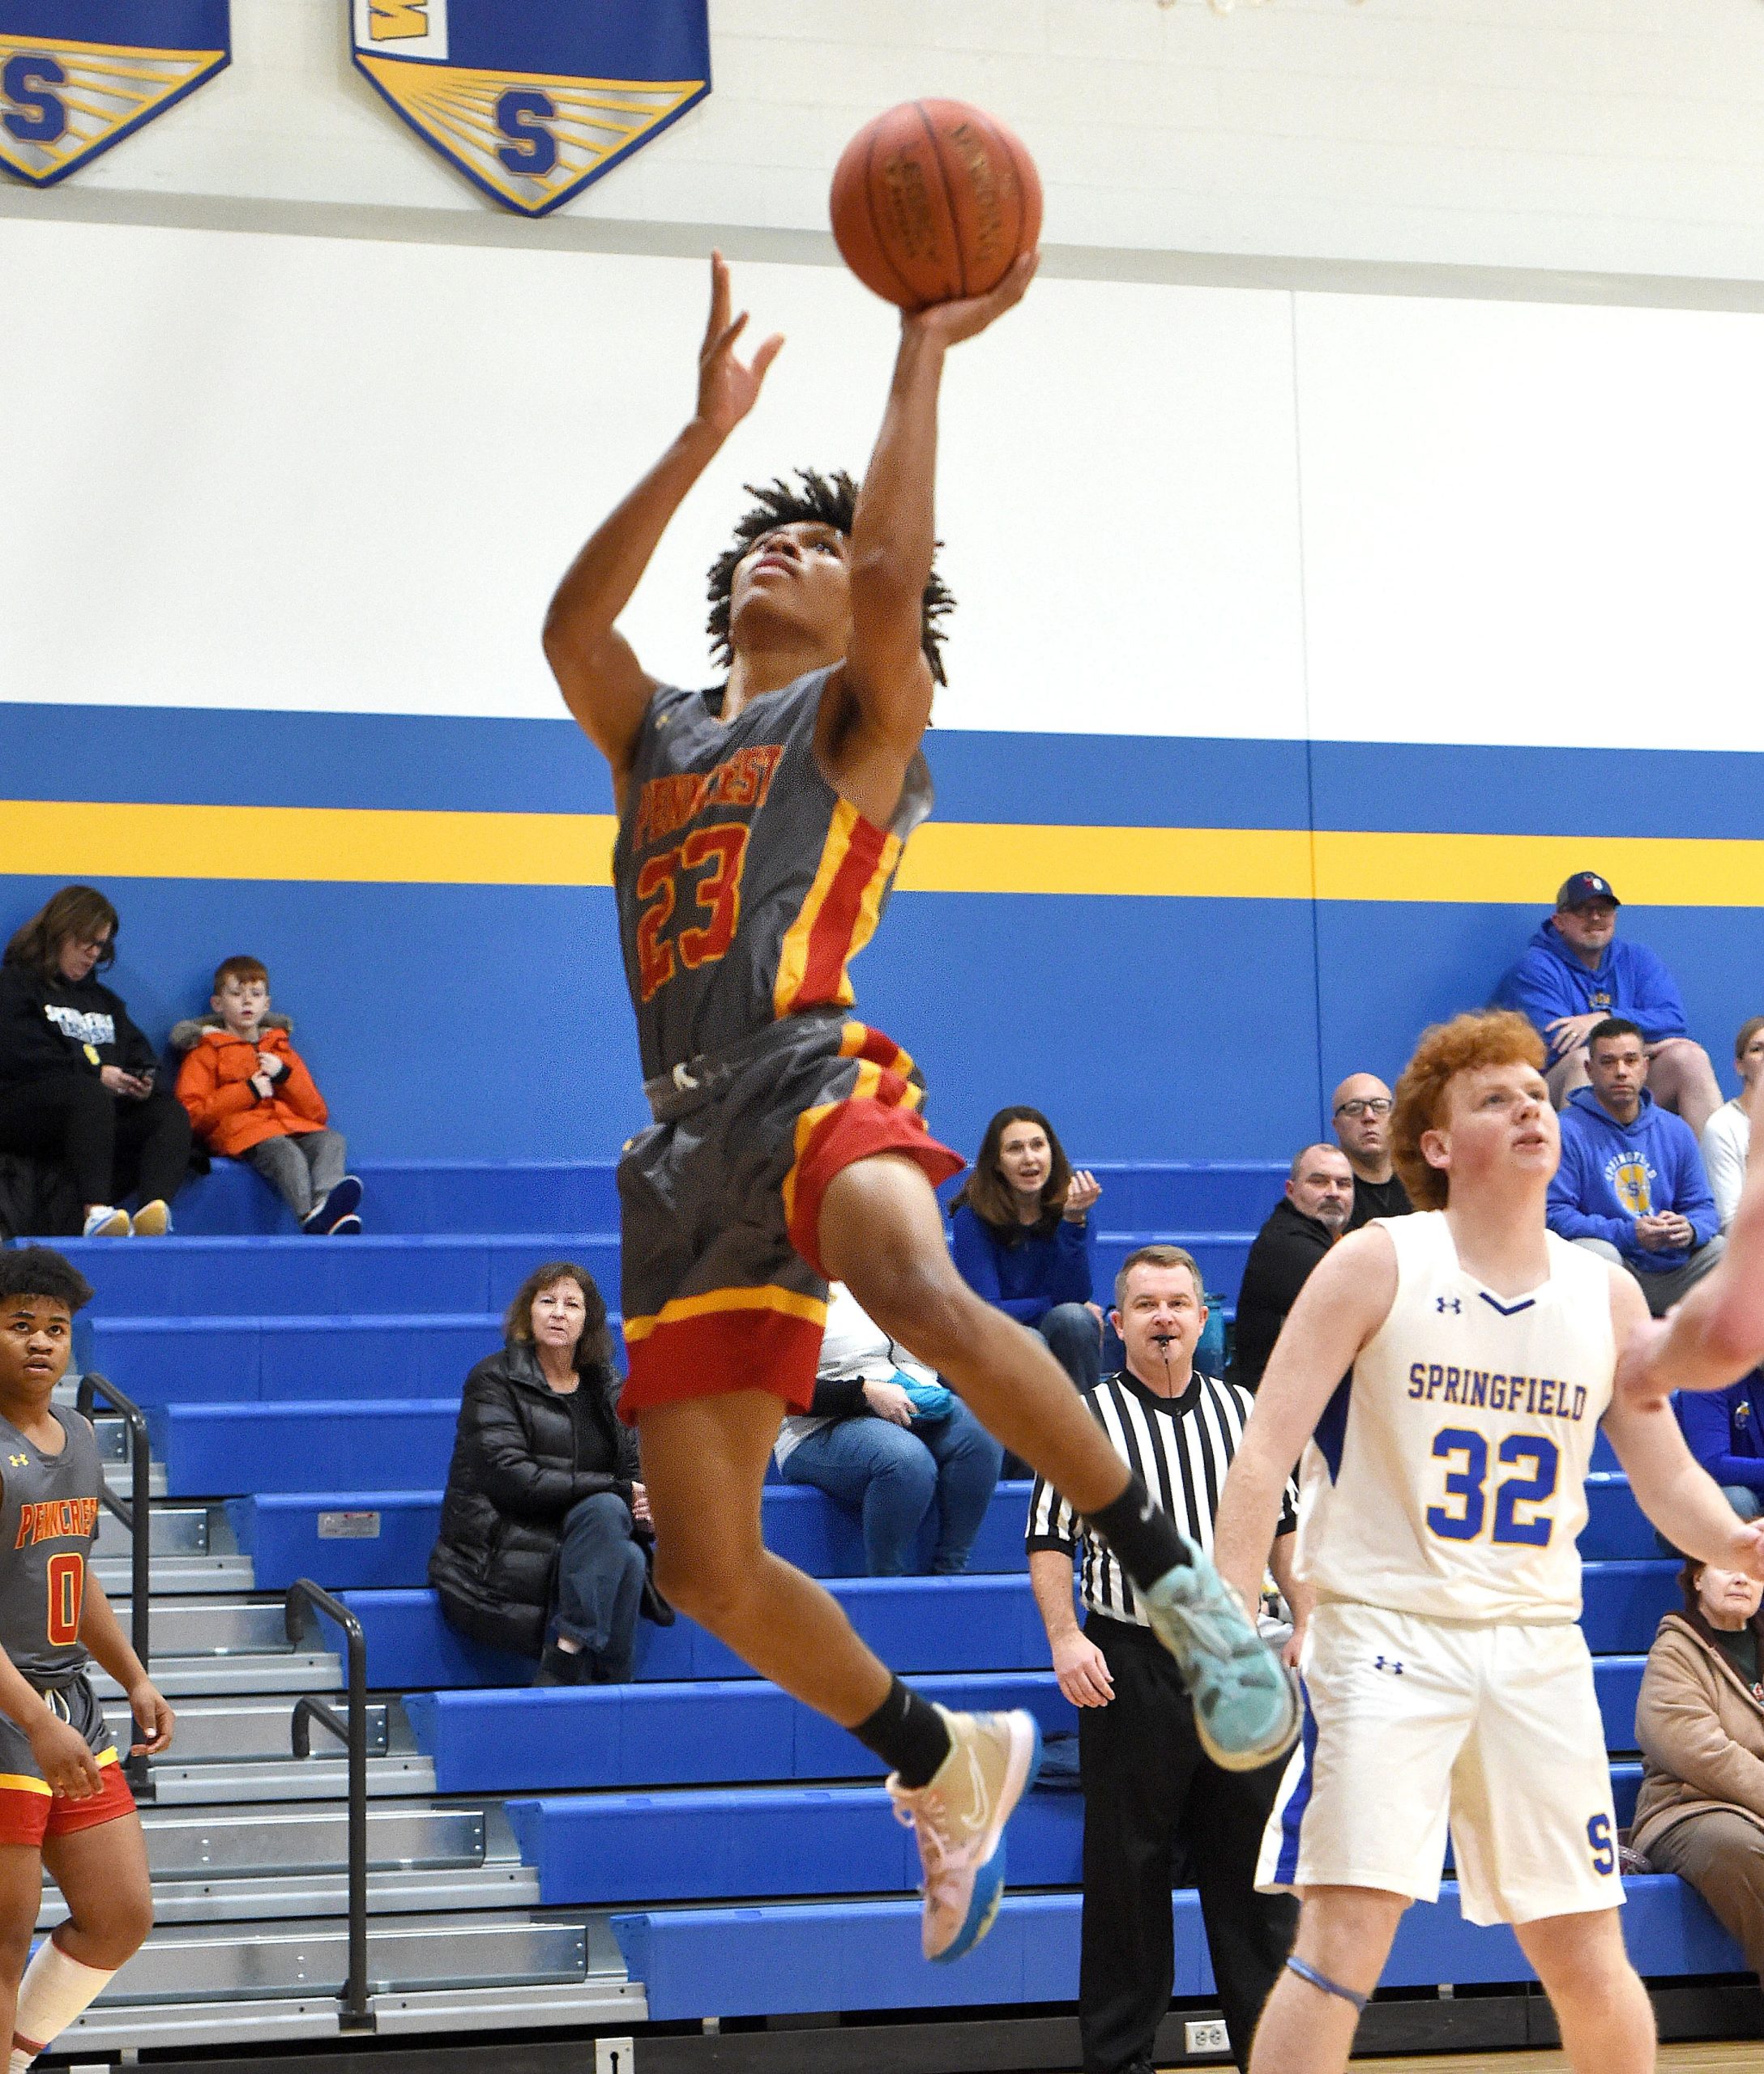 Boys Basketball Lee the key to an important Penncrest victory